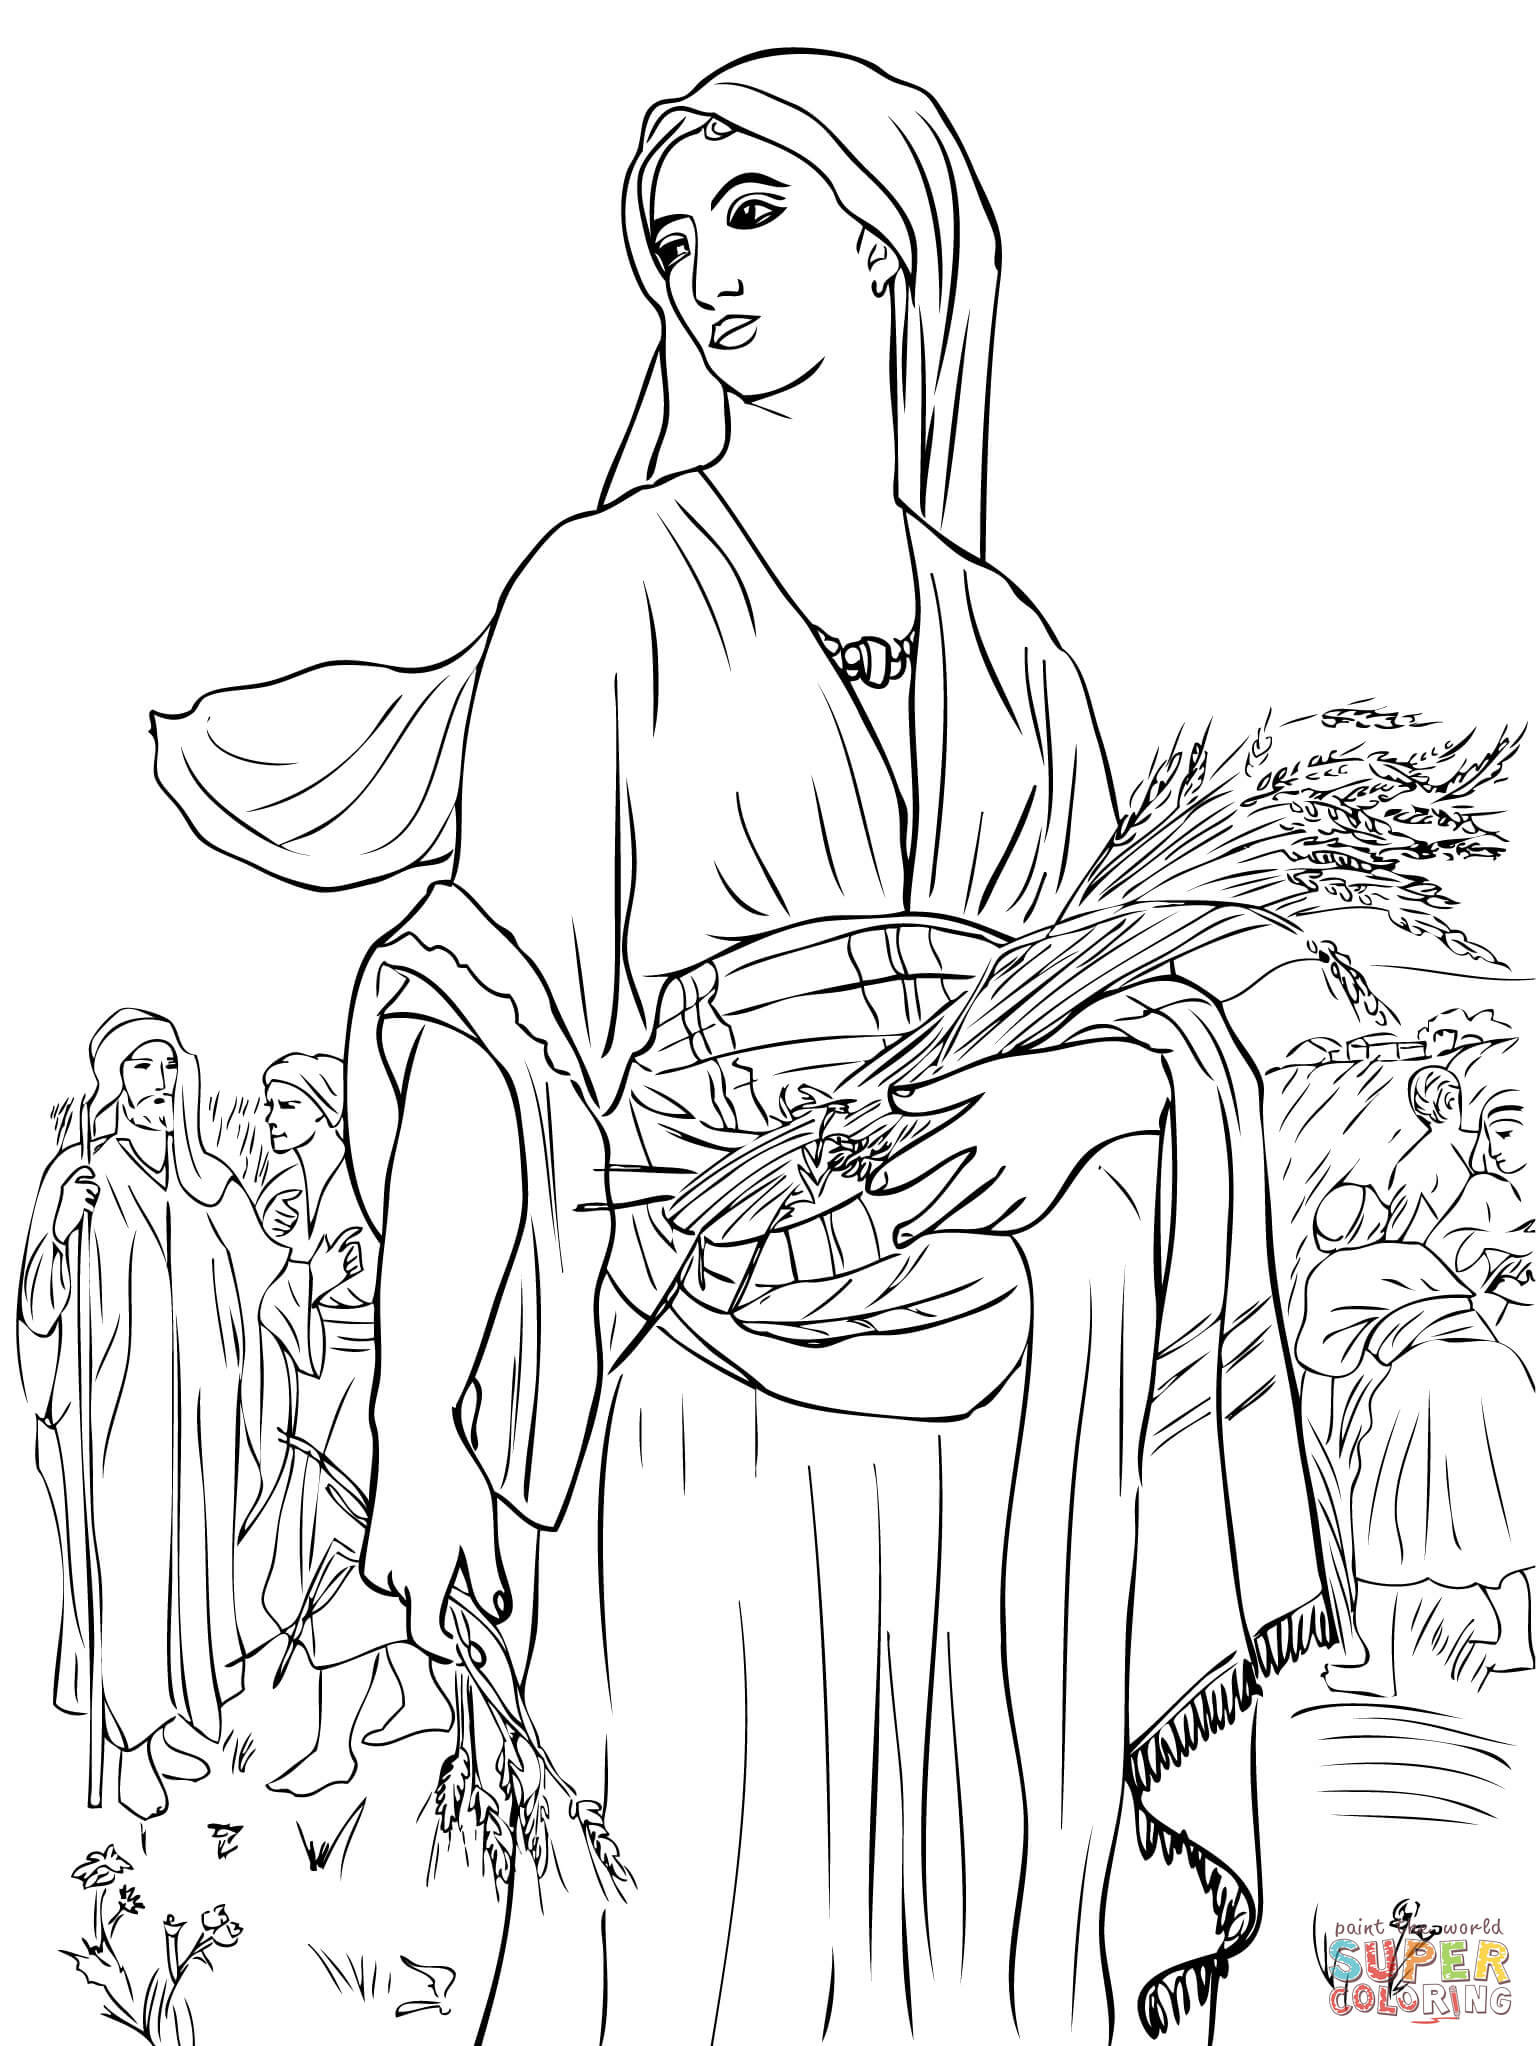 Coloring Pages For Children On The Story Of Ruth And Naomi
 Ruth and Naomi coloring page